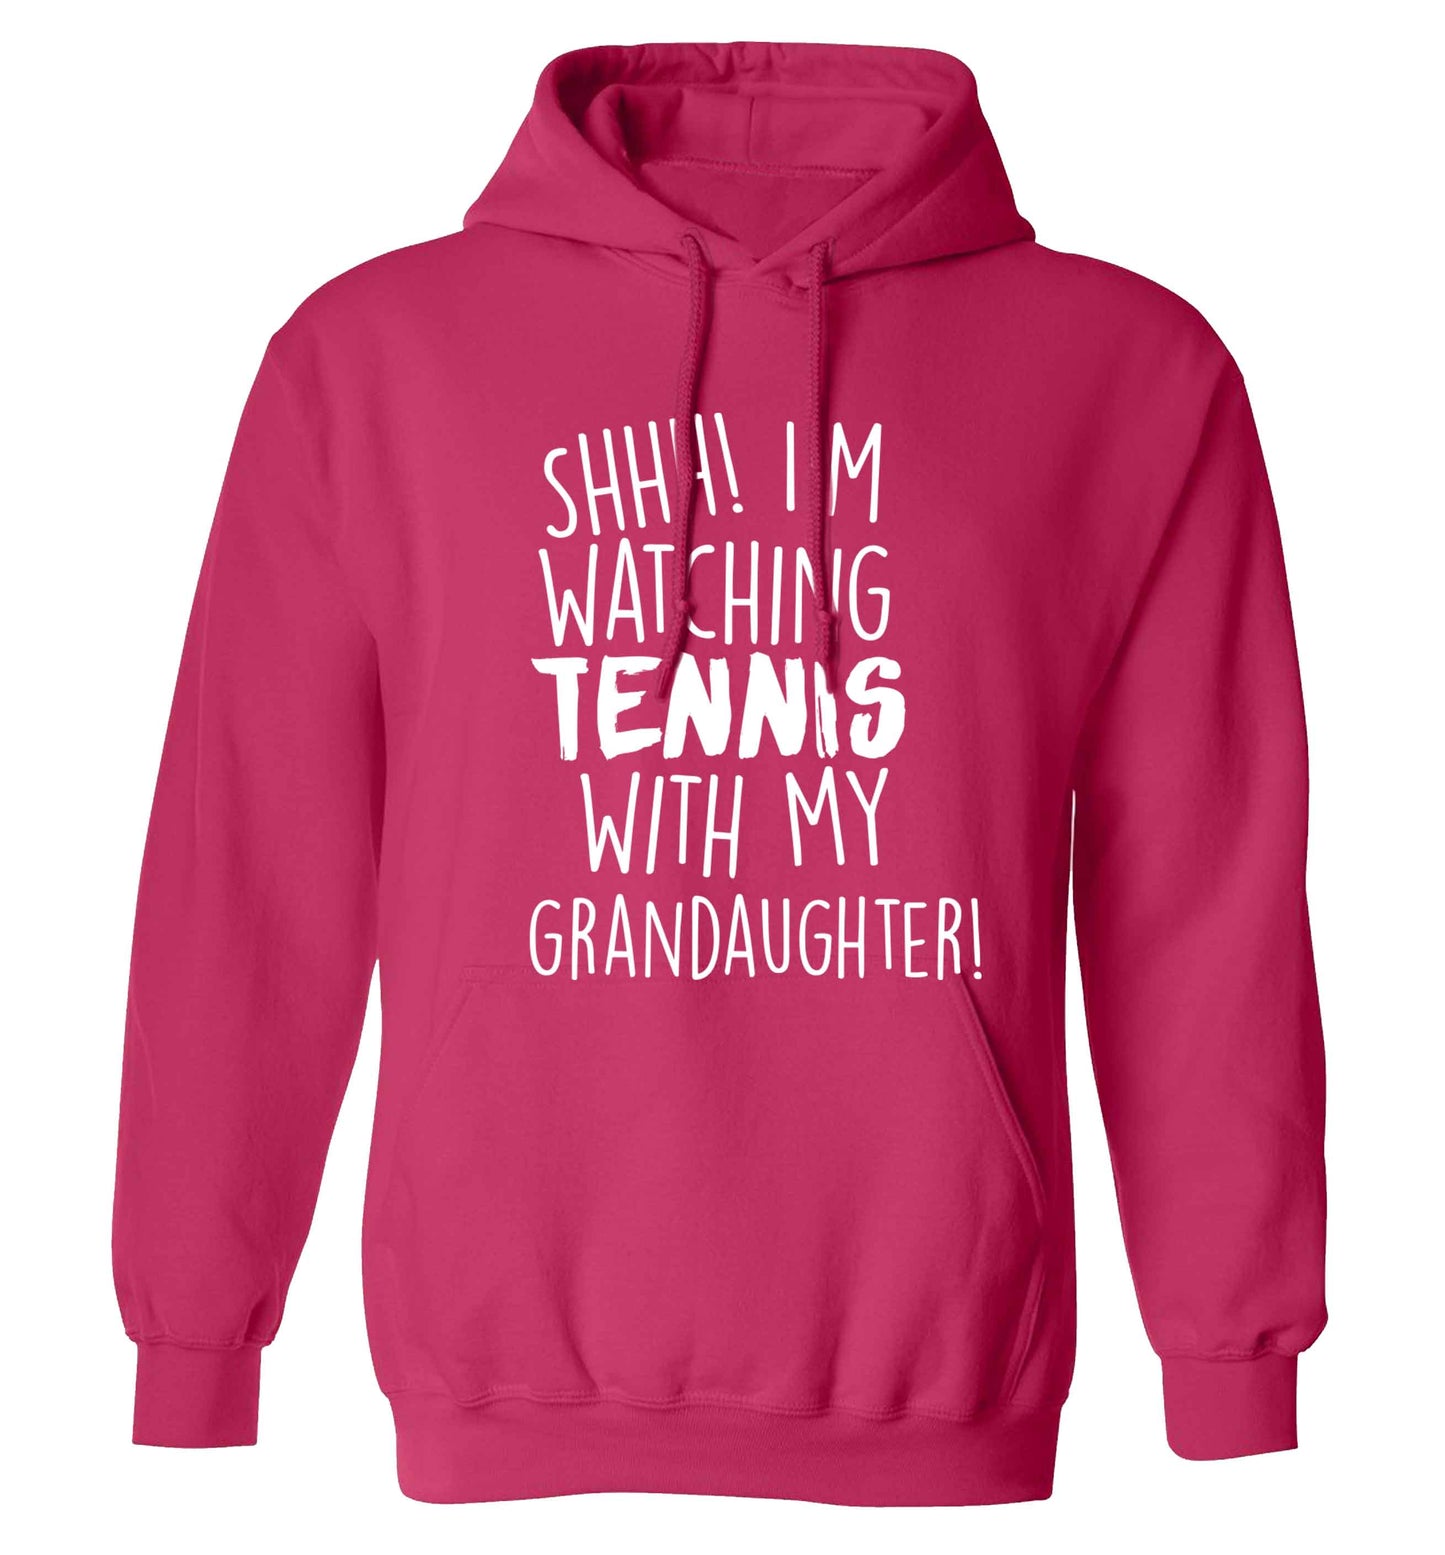 Shh! I'm watching tennis with my granddaughter! adults unisex pink hoodie 2XL